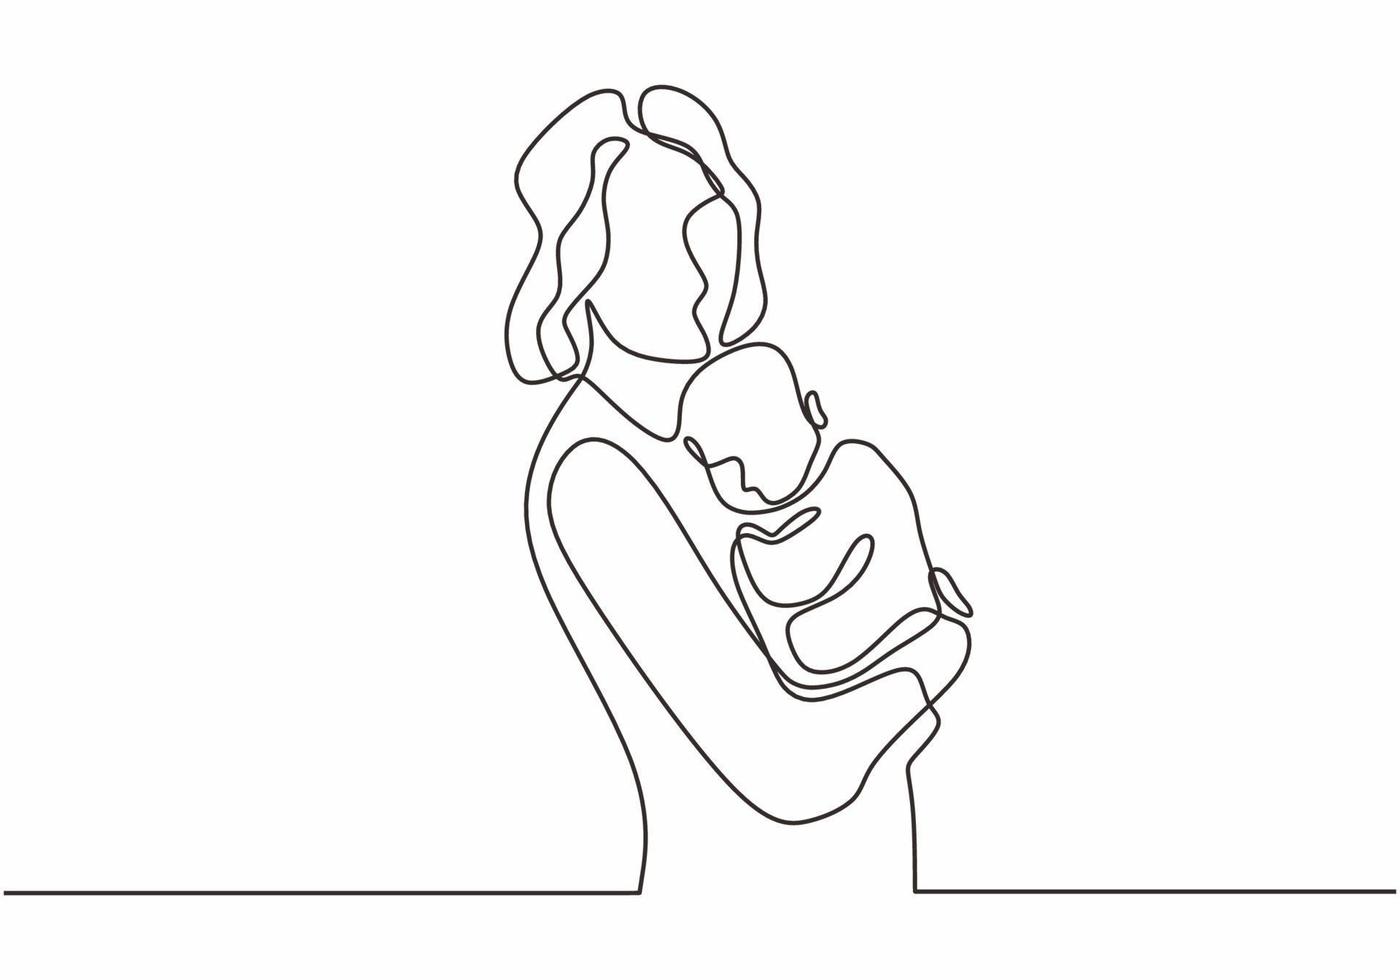 https://static.vecteezy.com/system/resources/previews/003/410/105/non_2x/happy-mom-and-baby-continuous-line-drawing-illustration-vector.jpg